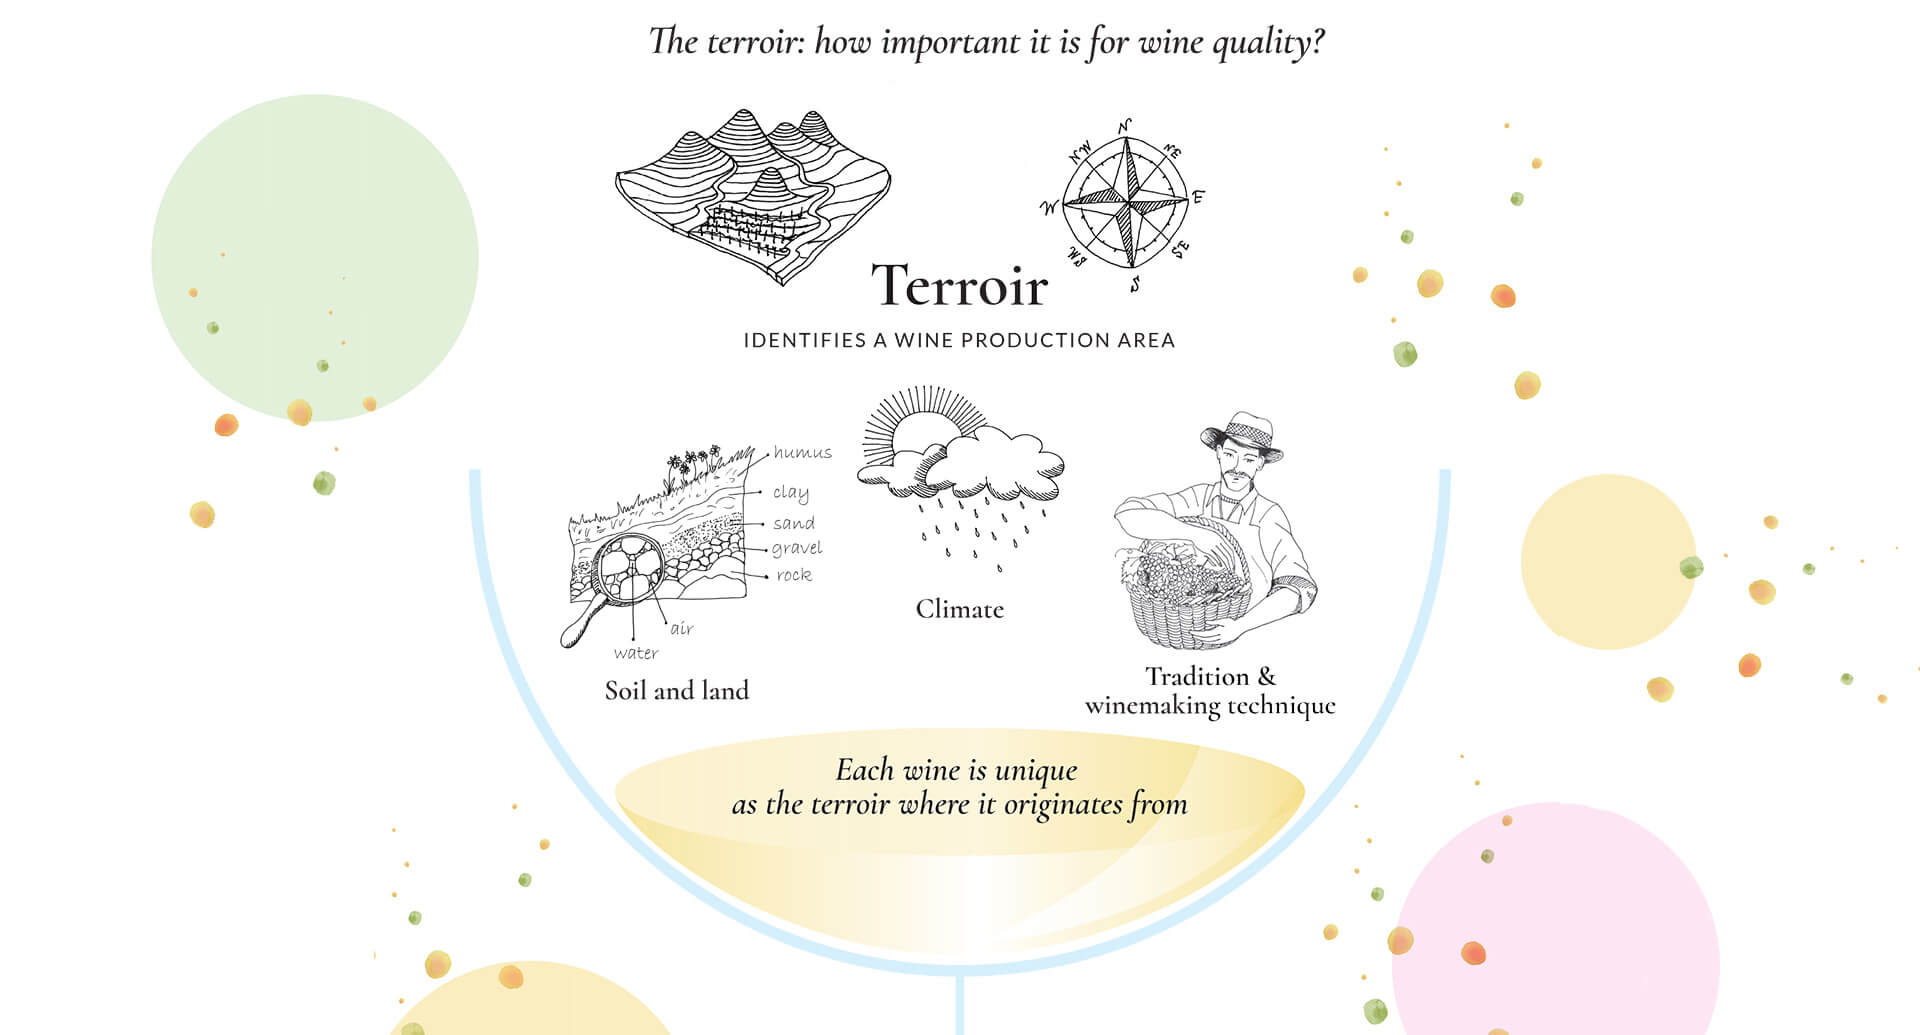 An infographic illustrating the factors of terroir in wine: soil and land, climate, tradition & winemaking technique.